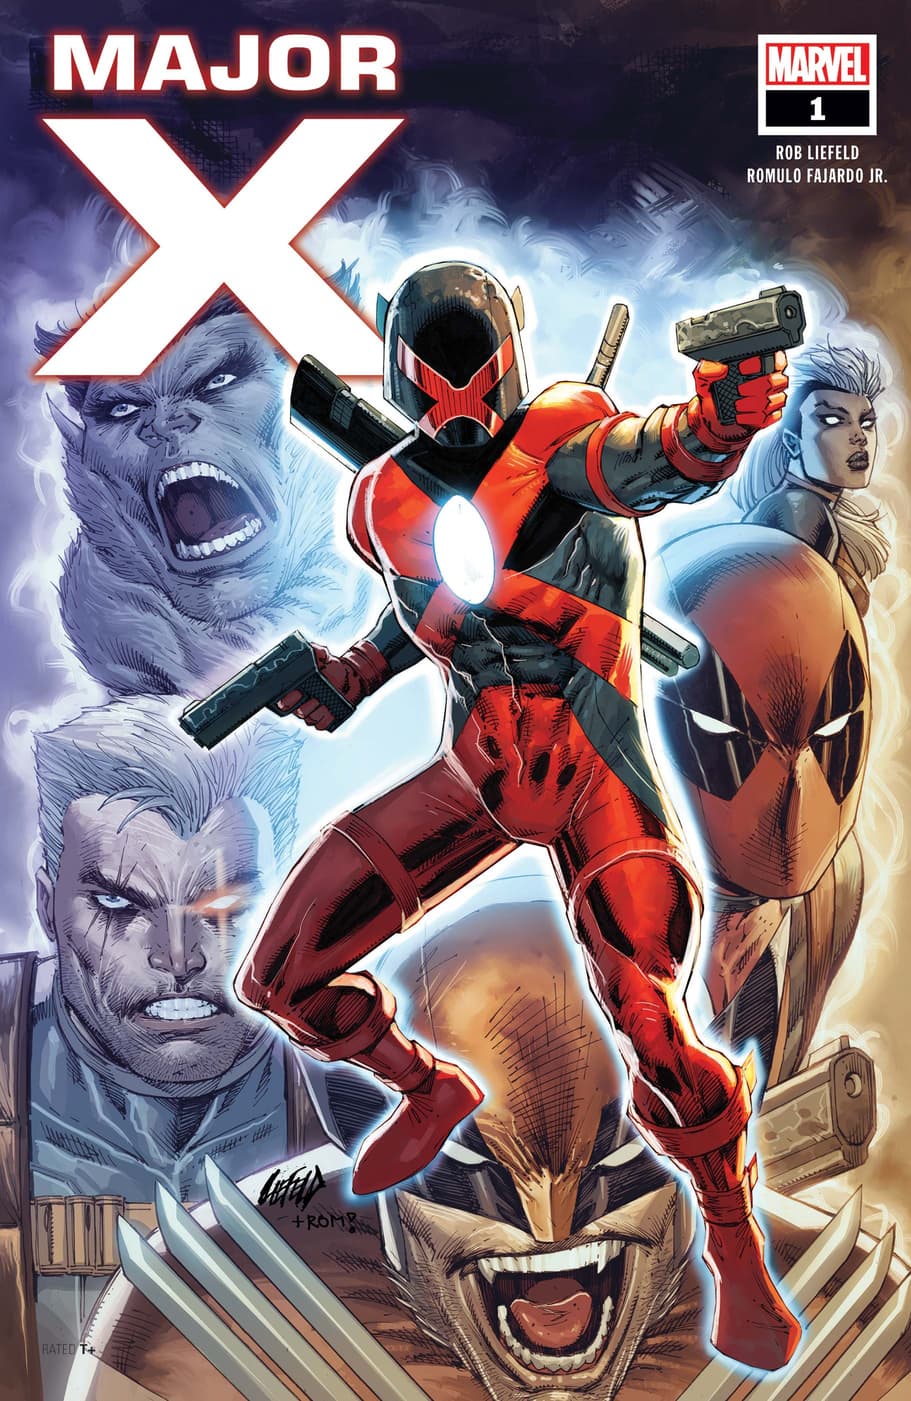 MAJOR X #1 cover by Rob Liefeld